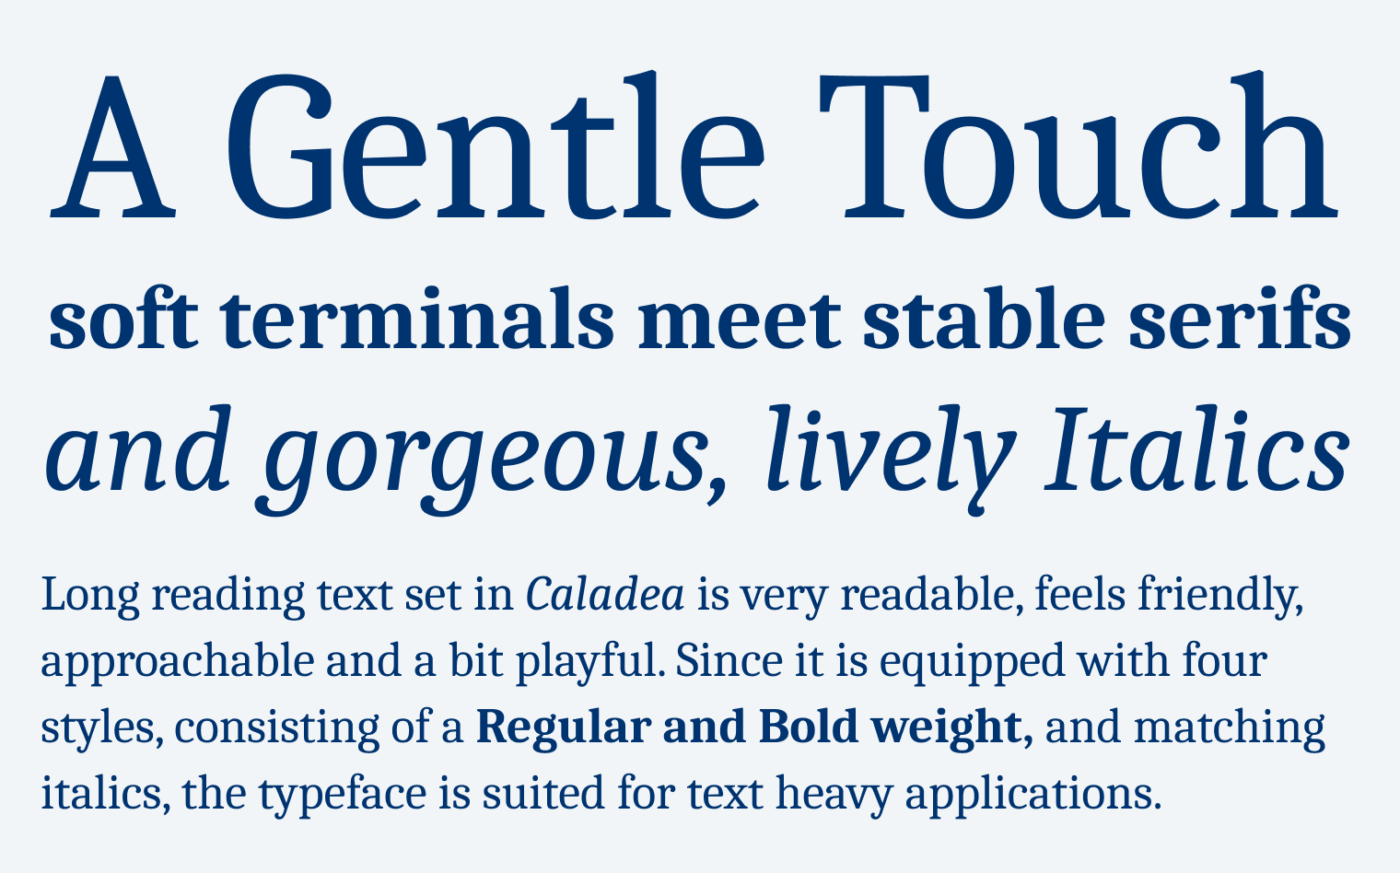 A Gentle Touch
soft terminals meet stable serifs and gorgeous, lively Italics
Long reading text set in Caladea is very readable, feels friendly, approachable and a bit playful. Since it is equipped with four styles, consisting of a Regular and Bold weight, and matching italics, the typeface is suited for text heavy applications.